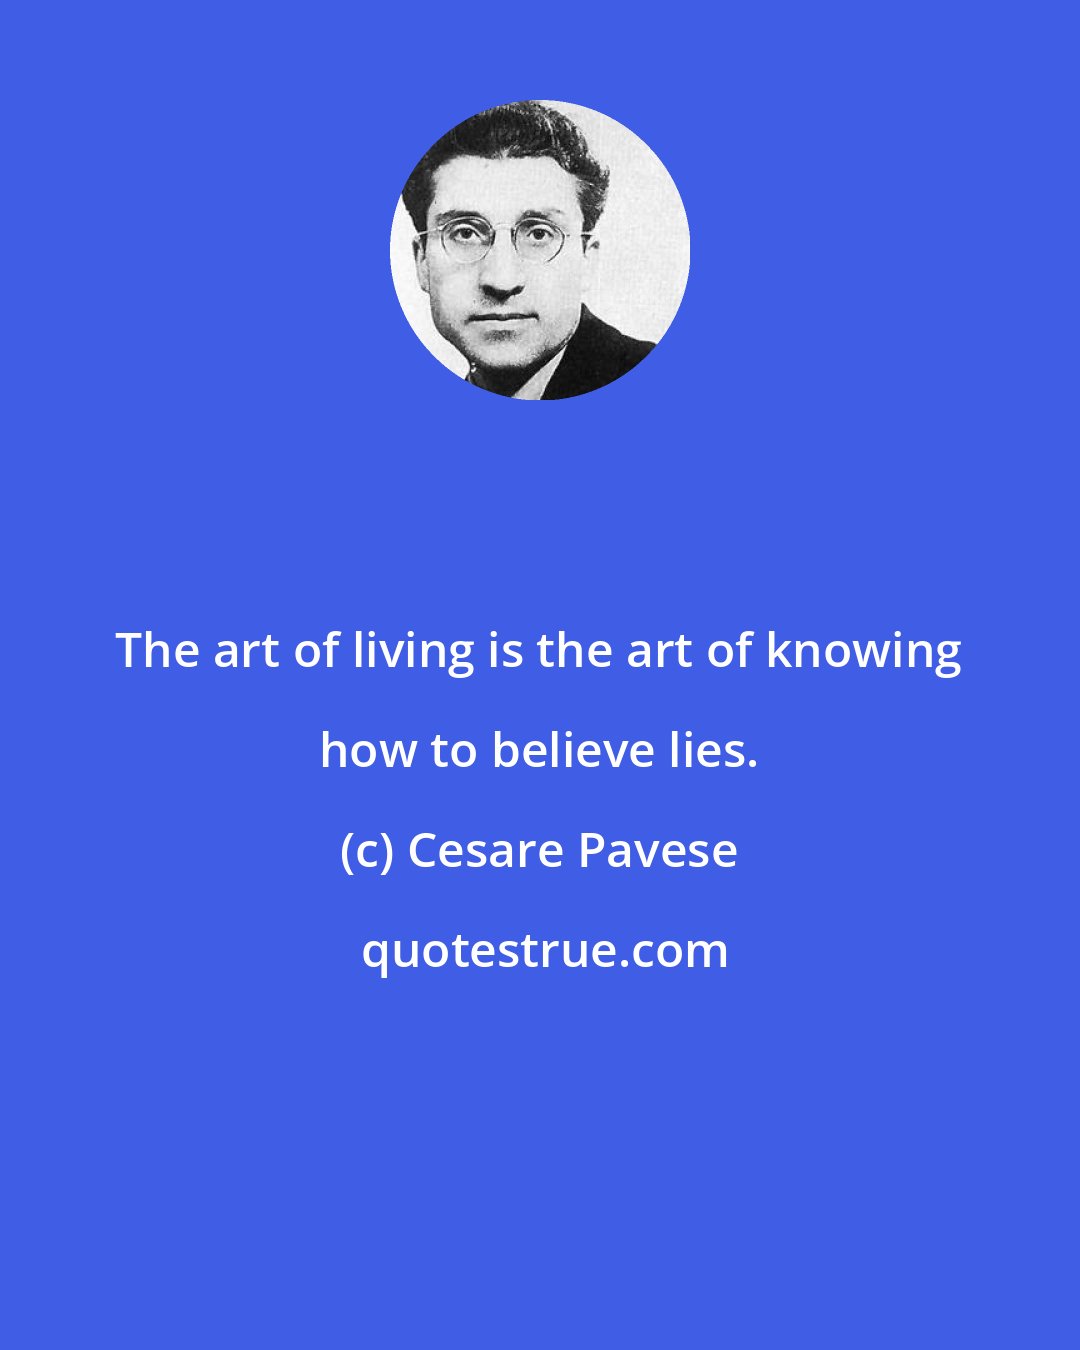 Cesare Pavese: The art of living is the art of knowing how to believe lies.